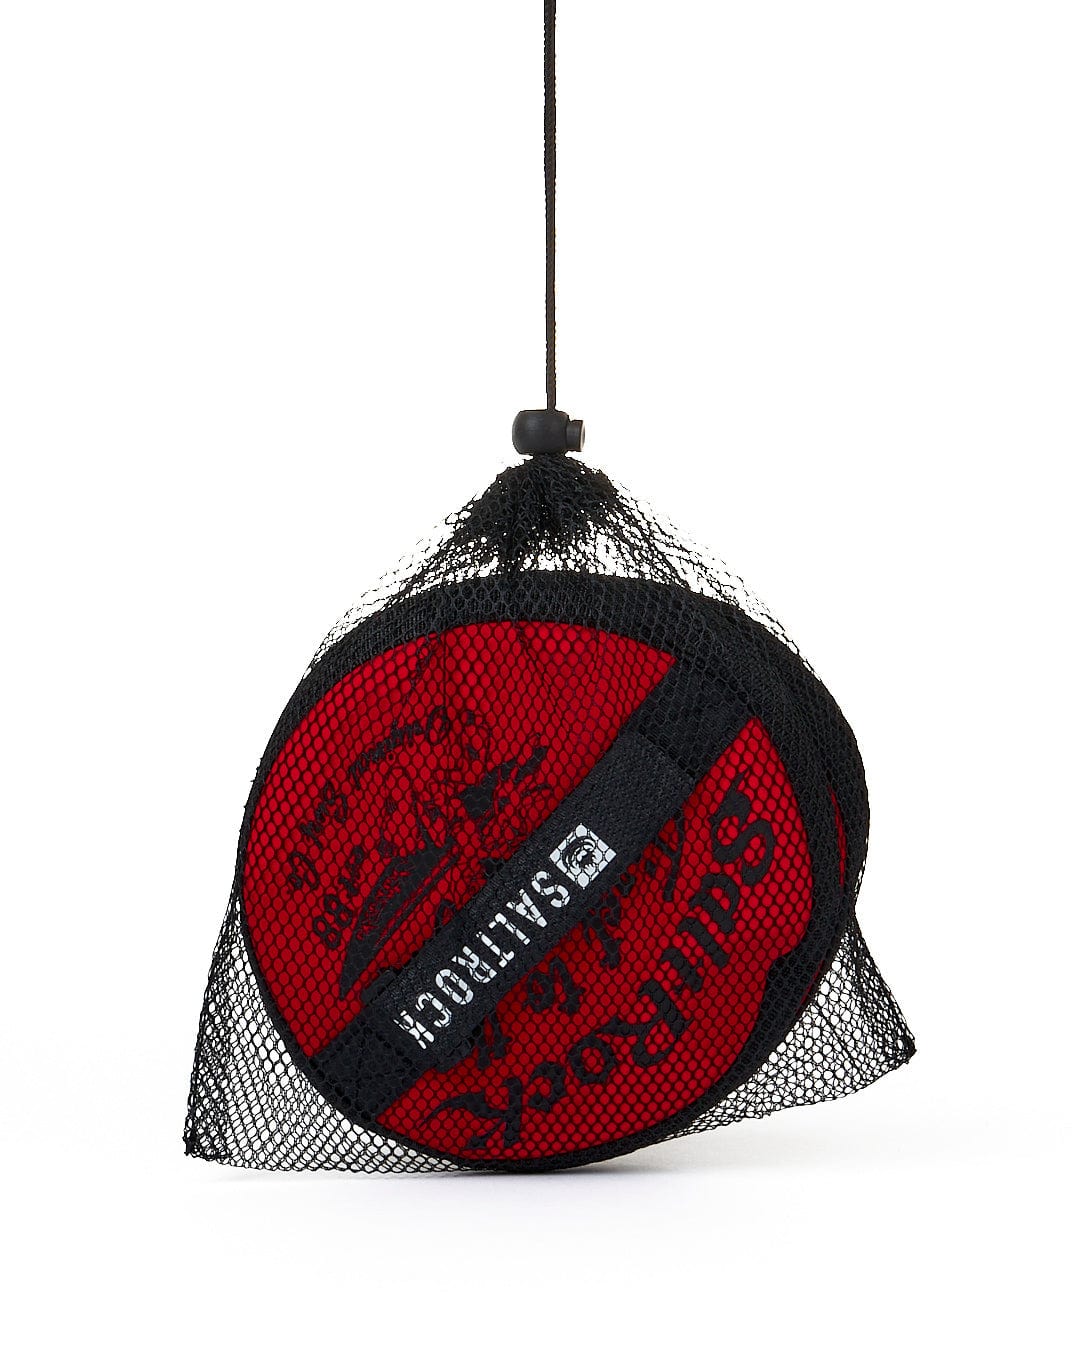 A Saltrock Jonty Catch Ball Set in Red and Black mesh, perfect for beach games, hanging on a white background.